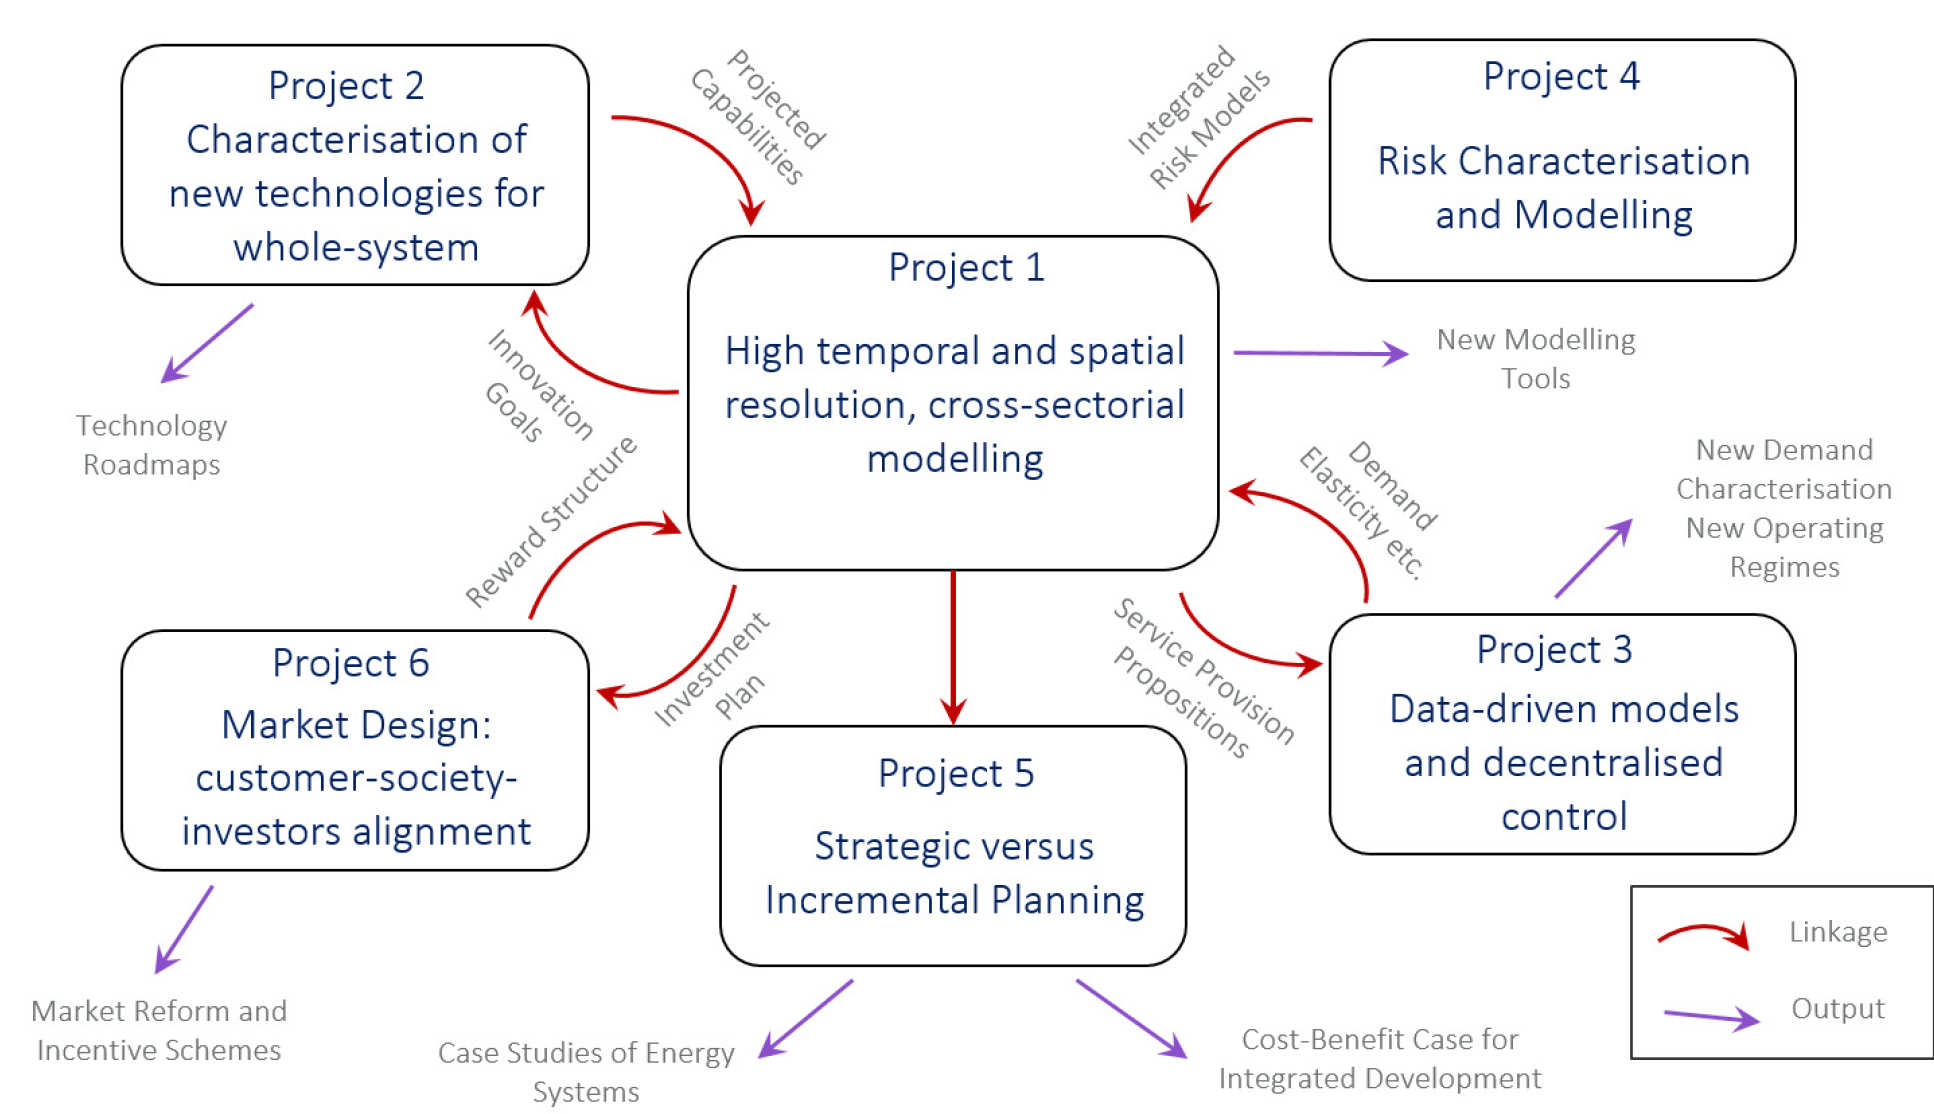 Inter-Relation of Projects